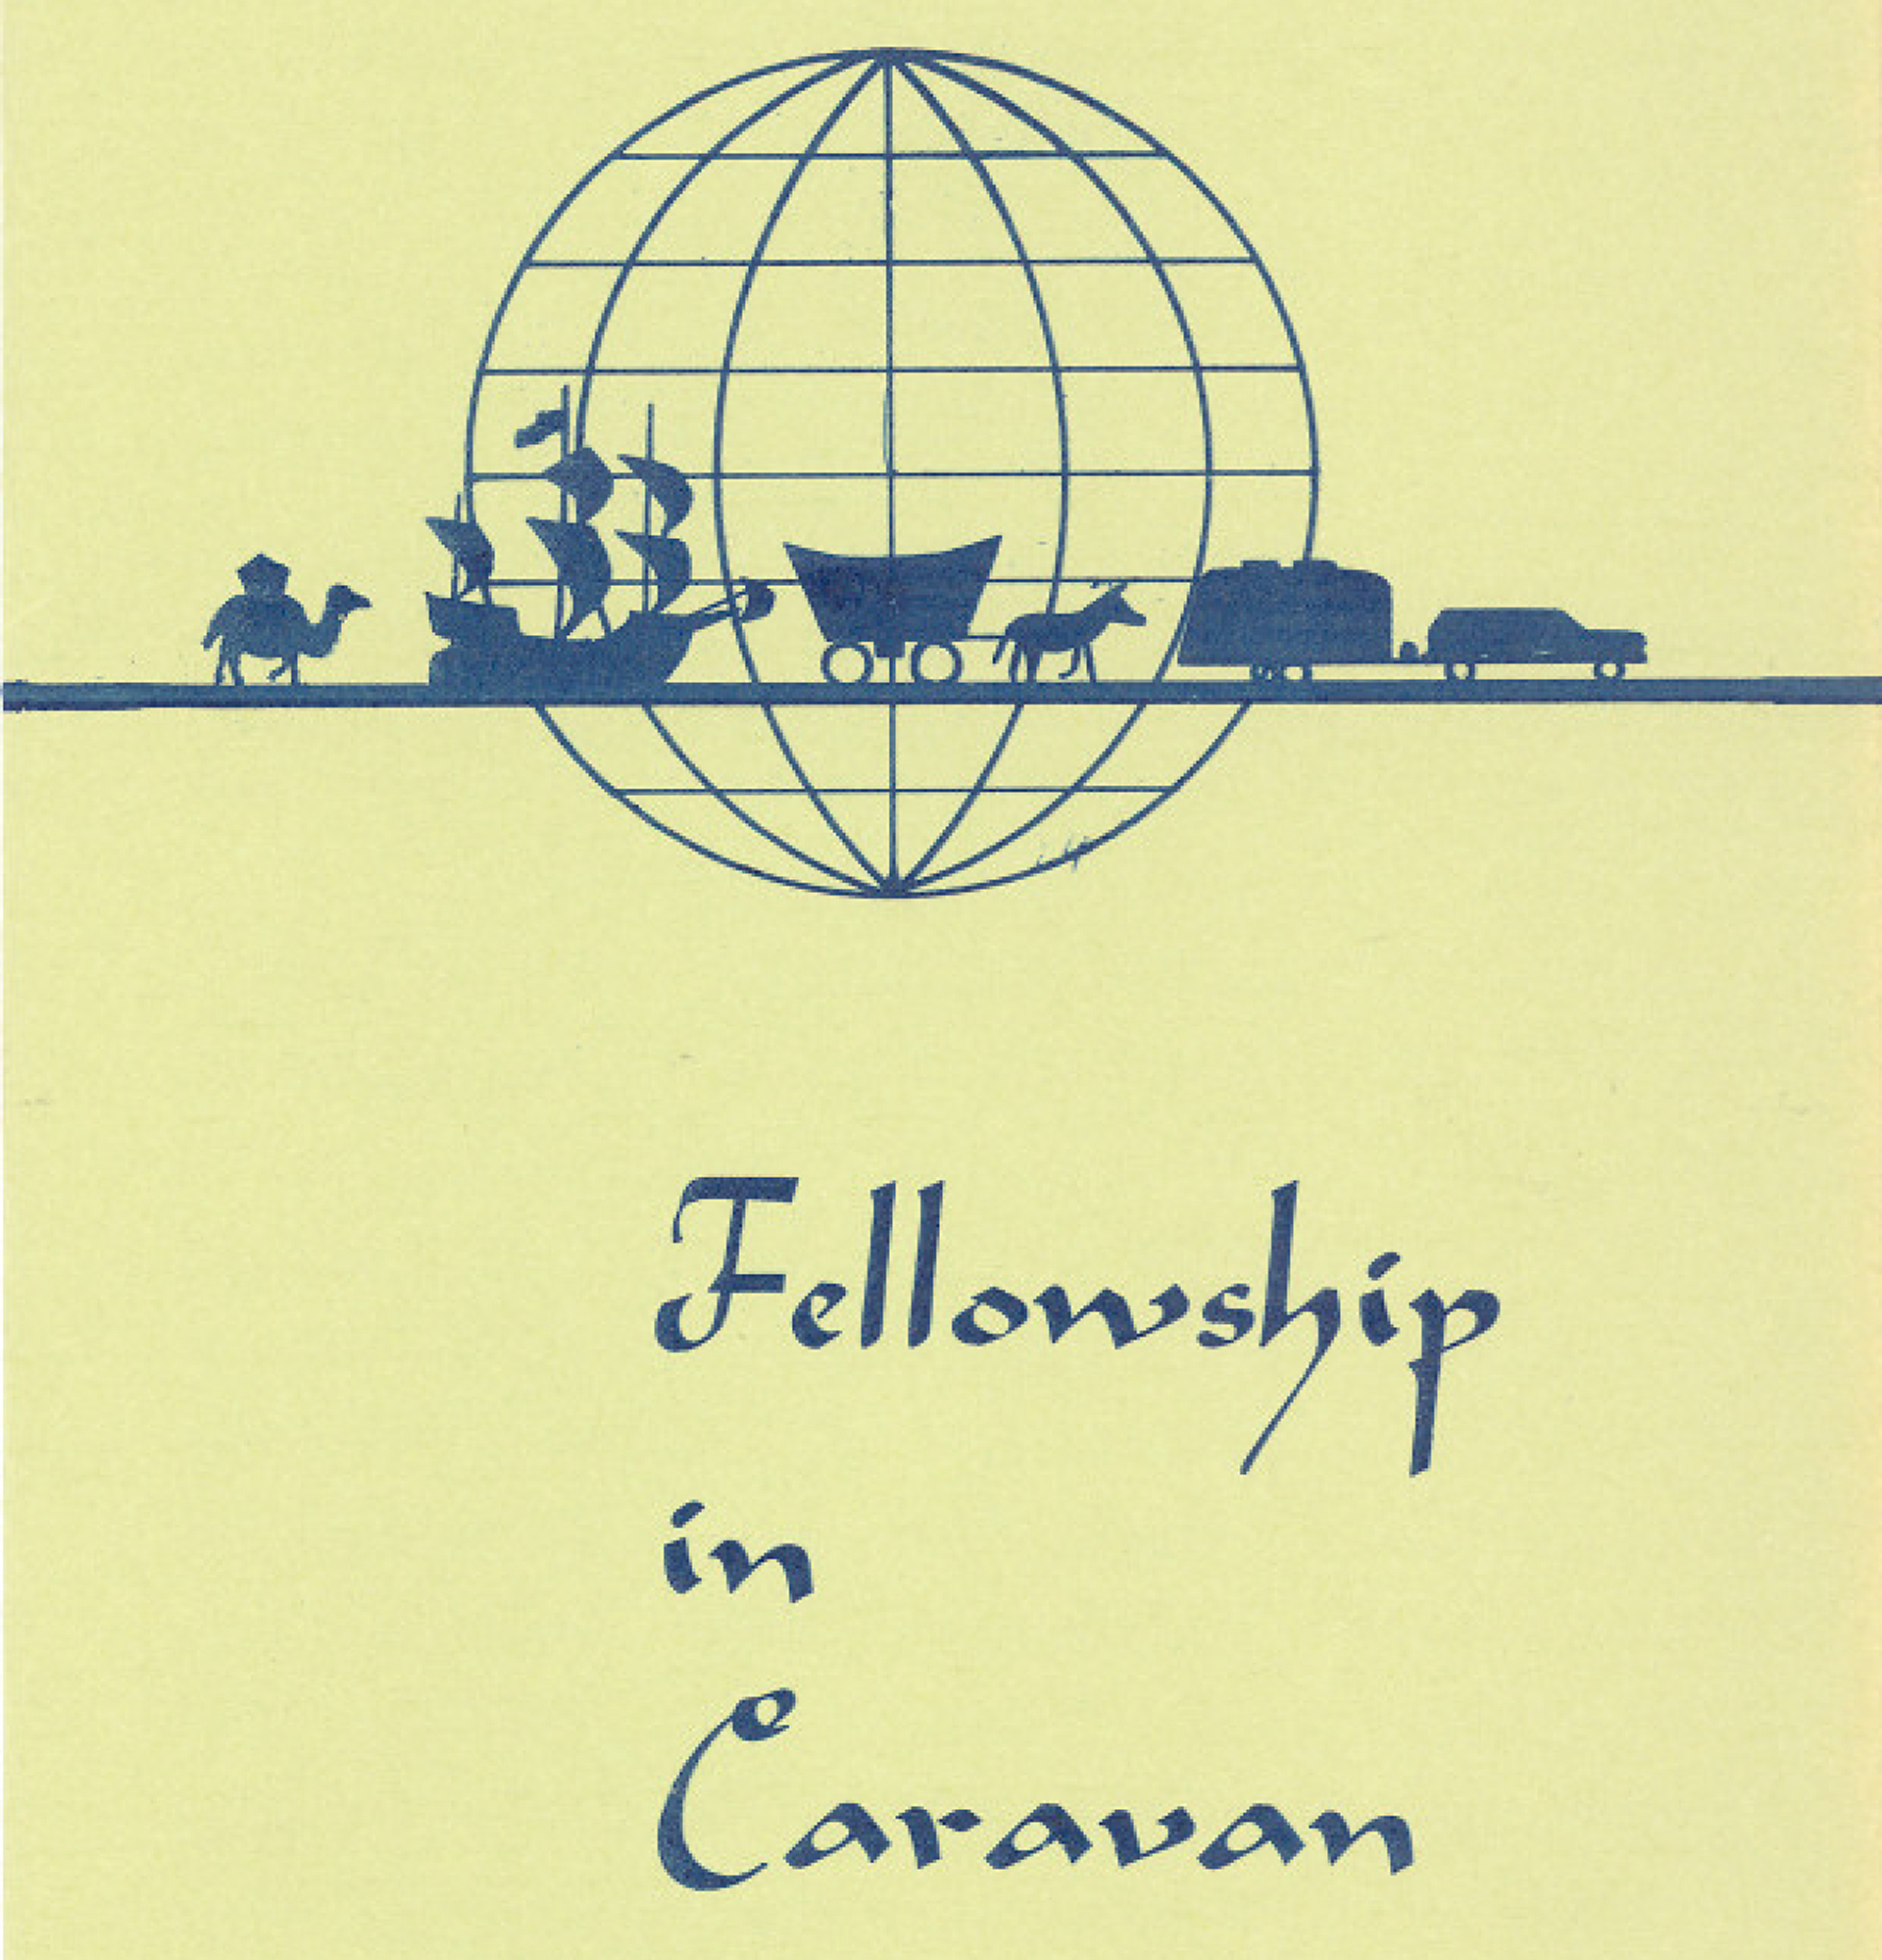 A cover of an old Wally Byam Foundation brochure that is yellow and blue